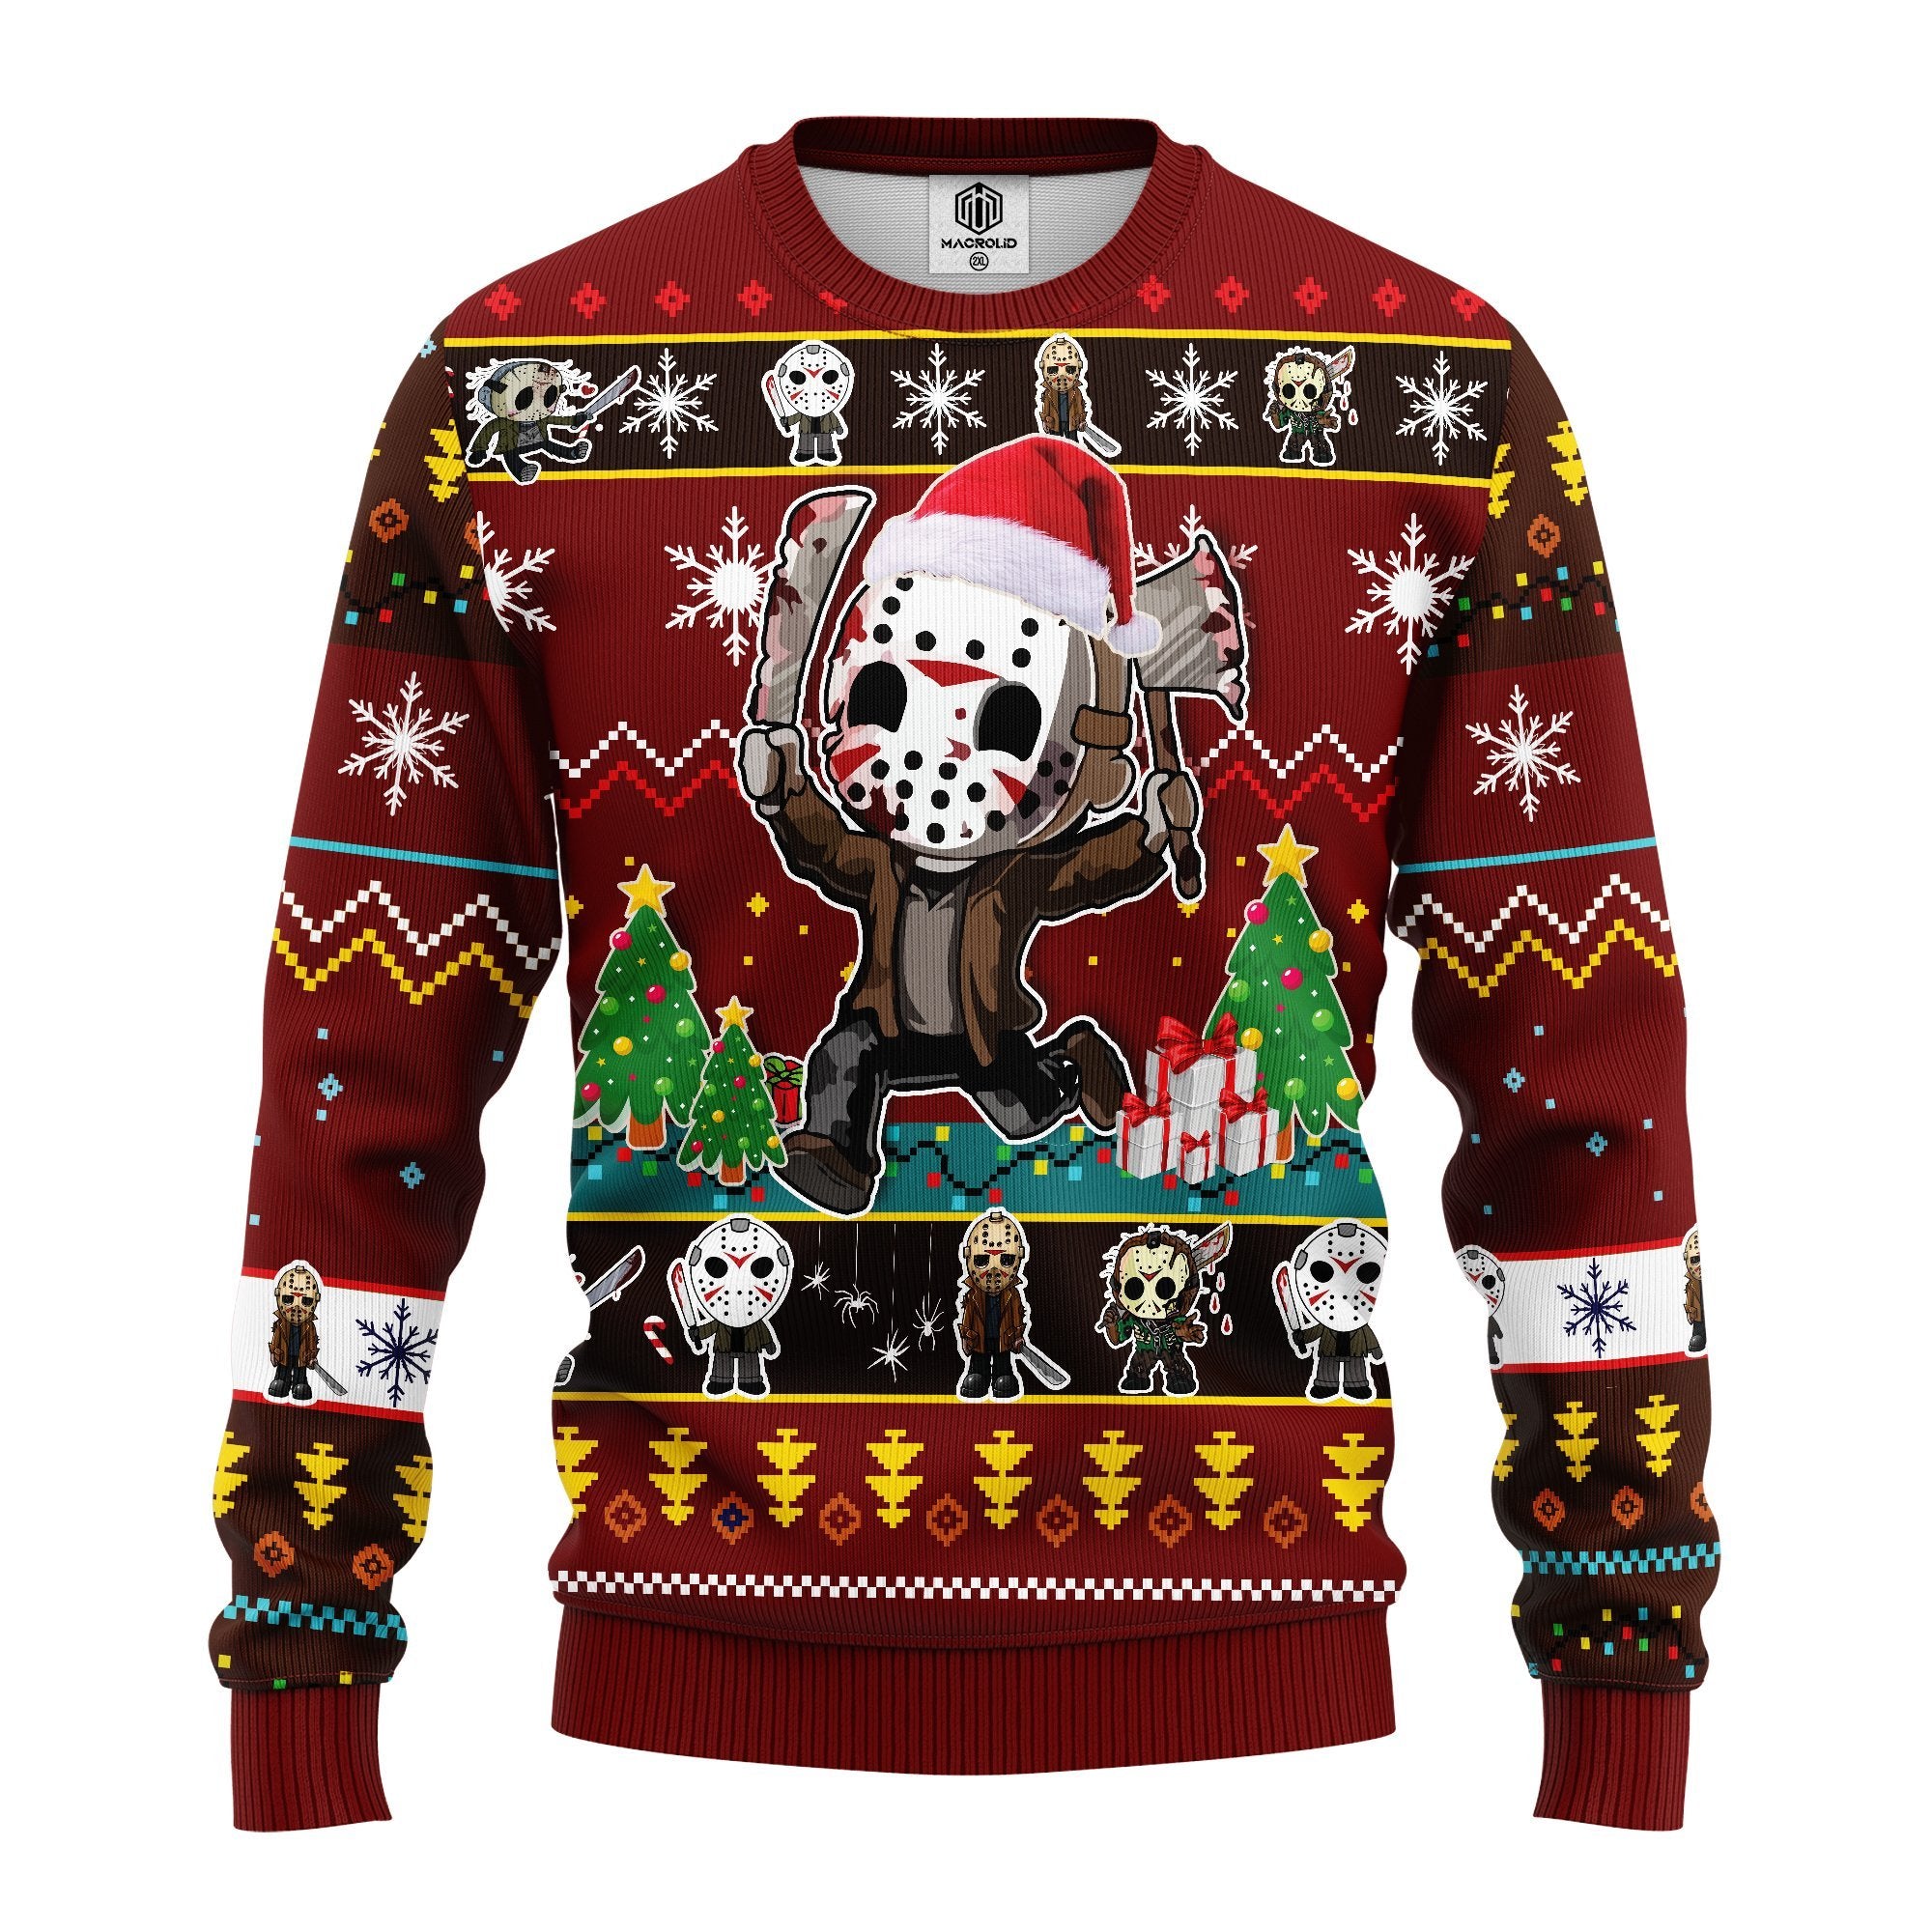 Friday The 13th Jason Voorhees Horror Movies Funny Ugly Christmas Sweater Amazing Gift Idea Thanksgiving Gift